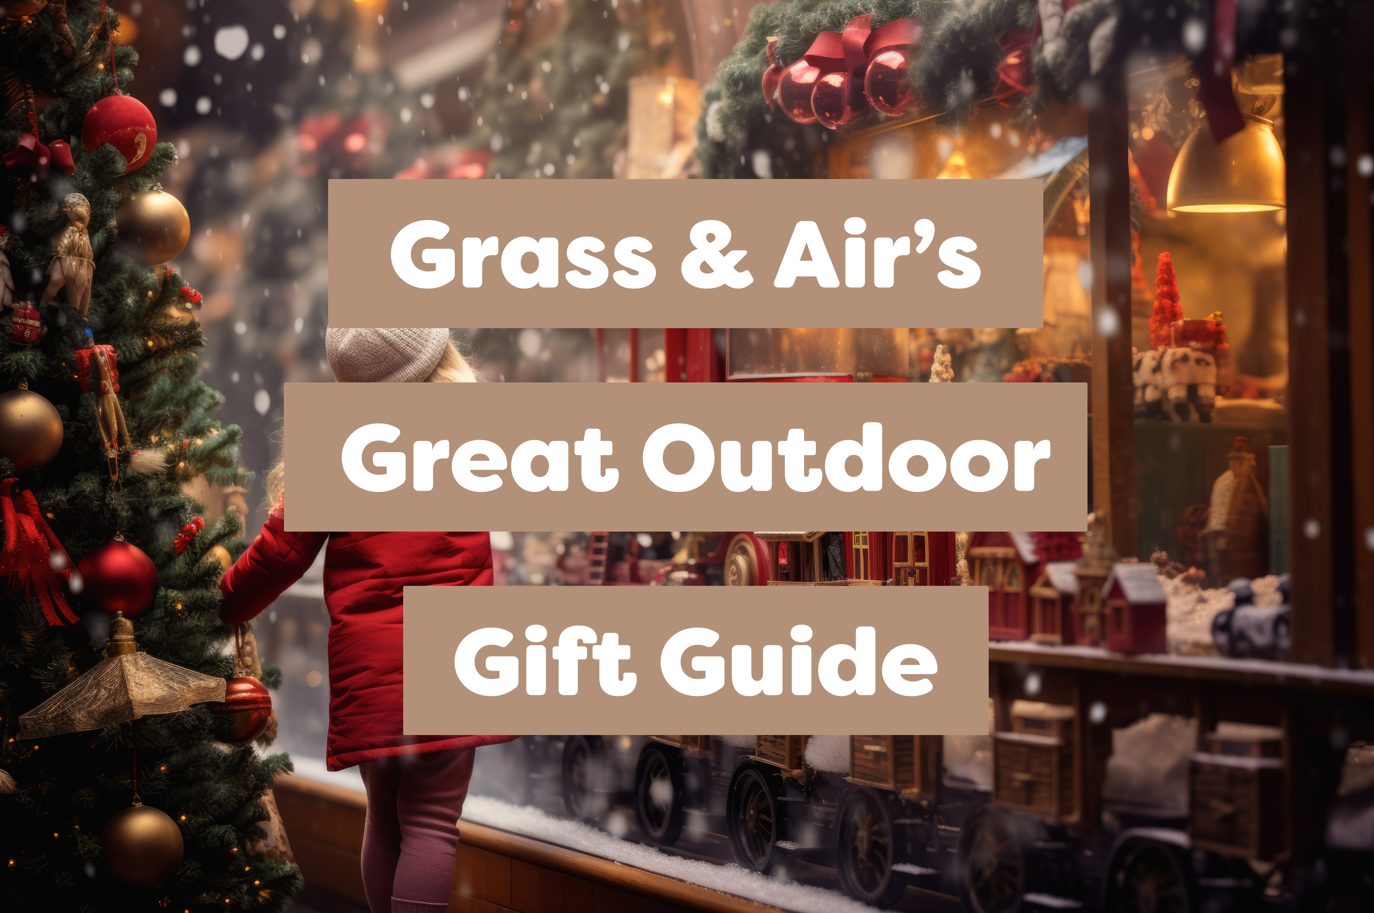 Grass & Air’s Christmas Great Outdoor Gift Guides